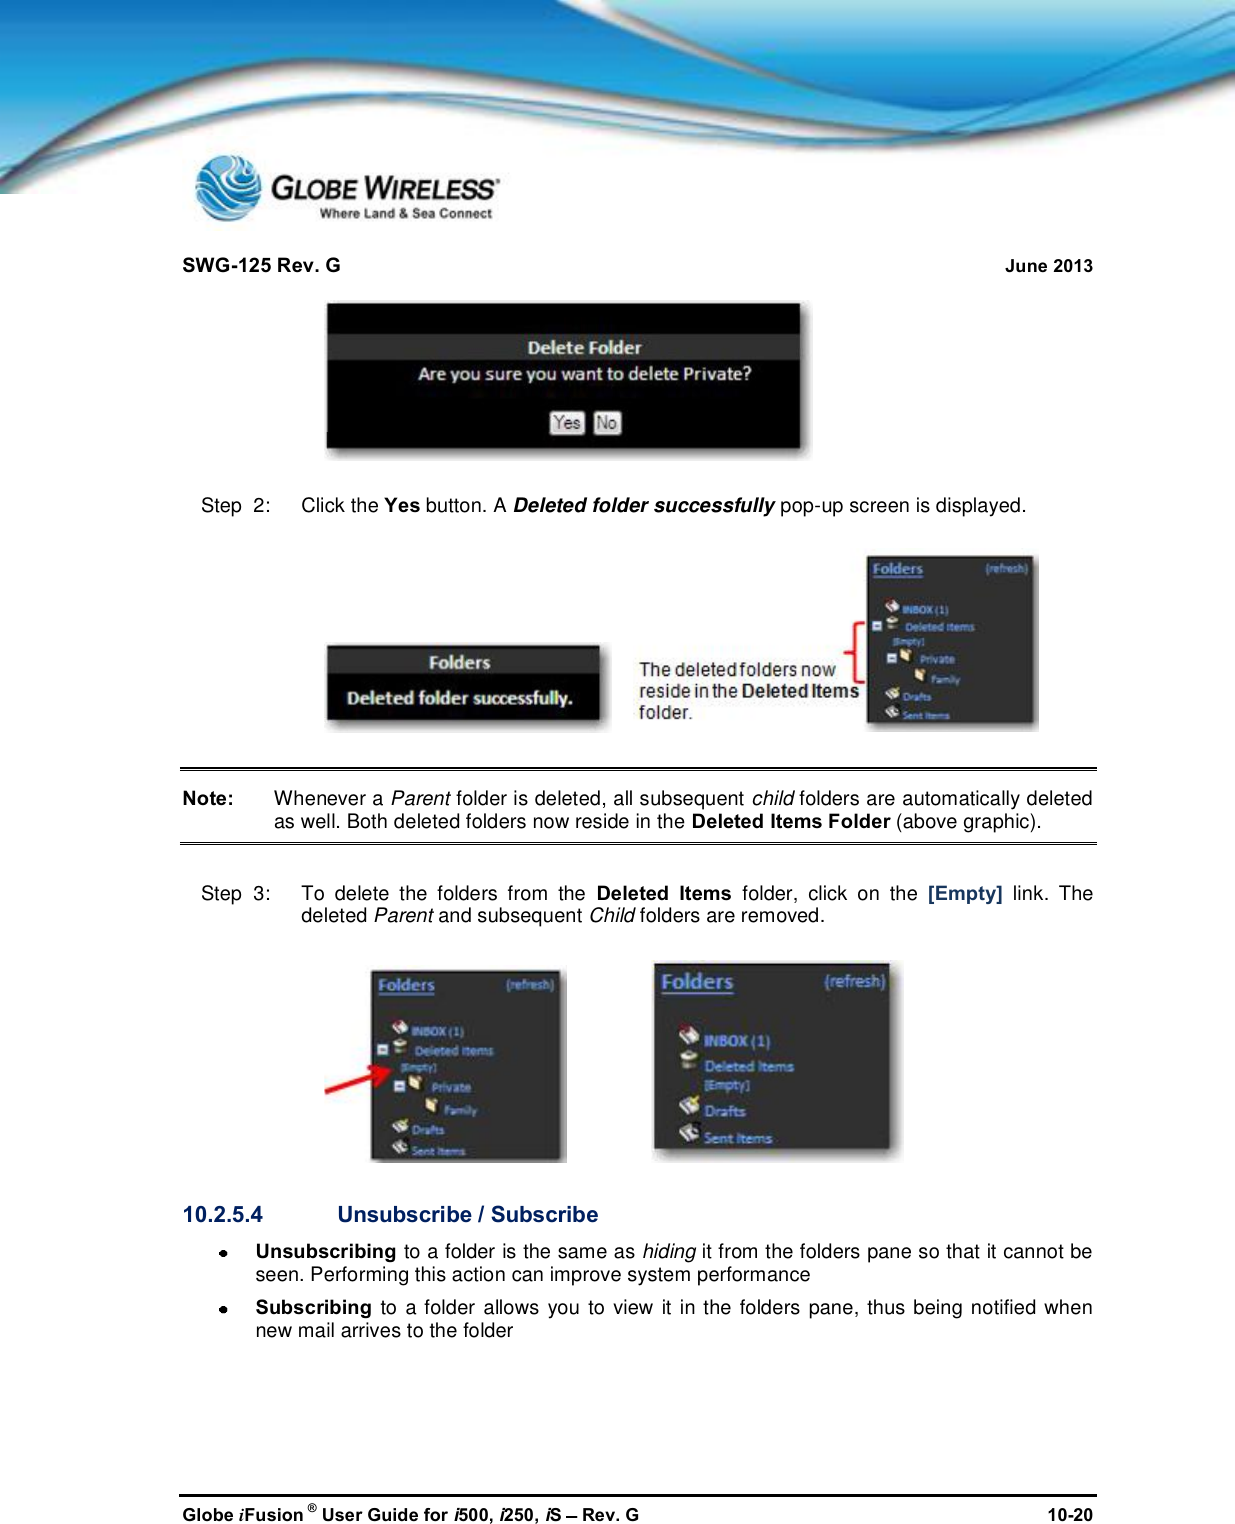 SWG-125 Rev. G June 2013Globe iFusion ®User Guide for i500, i250, iSRev. G 10-20Step  2:   Click the Yes button. A Deleted folder successfully pop-up screen is displayed.Note: Whenever a Parent folder is deleted, all subsequent child folders are automatically deletedas well. Both deleted folders now reside in the Deleted Items Folder (above graphic).Step  3:   To delete the folders from the Deleted Items folder, click on the [Empty] link. Thedeleted Parent and subsequent Child folders are removed.10.2.5.4 Unsubscribe / SubscribeUnsubscribing to a folder is the same as hiding it from the folders pane so that it cannot beseen. Performing this action can improve system performanceSubscribing to a folder allows you to view it in the folders pane, thus being notified whennew mail arrives to the folder